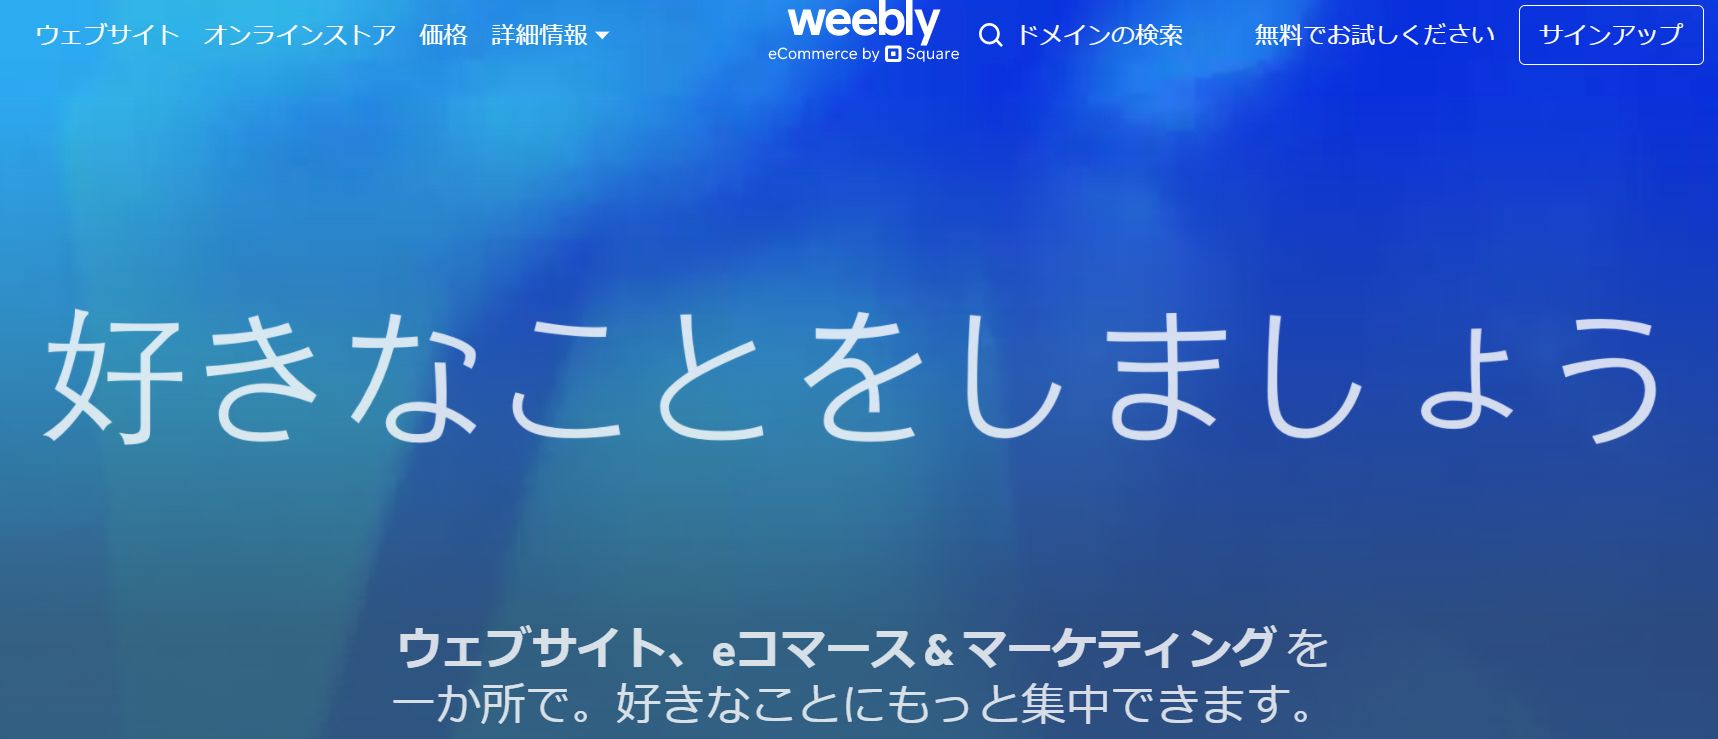 Weebly公式ページ